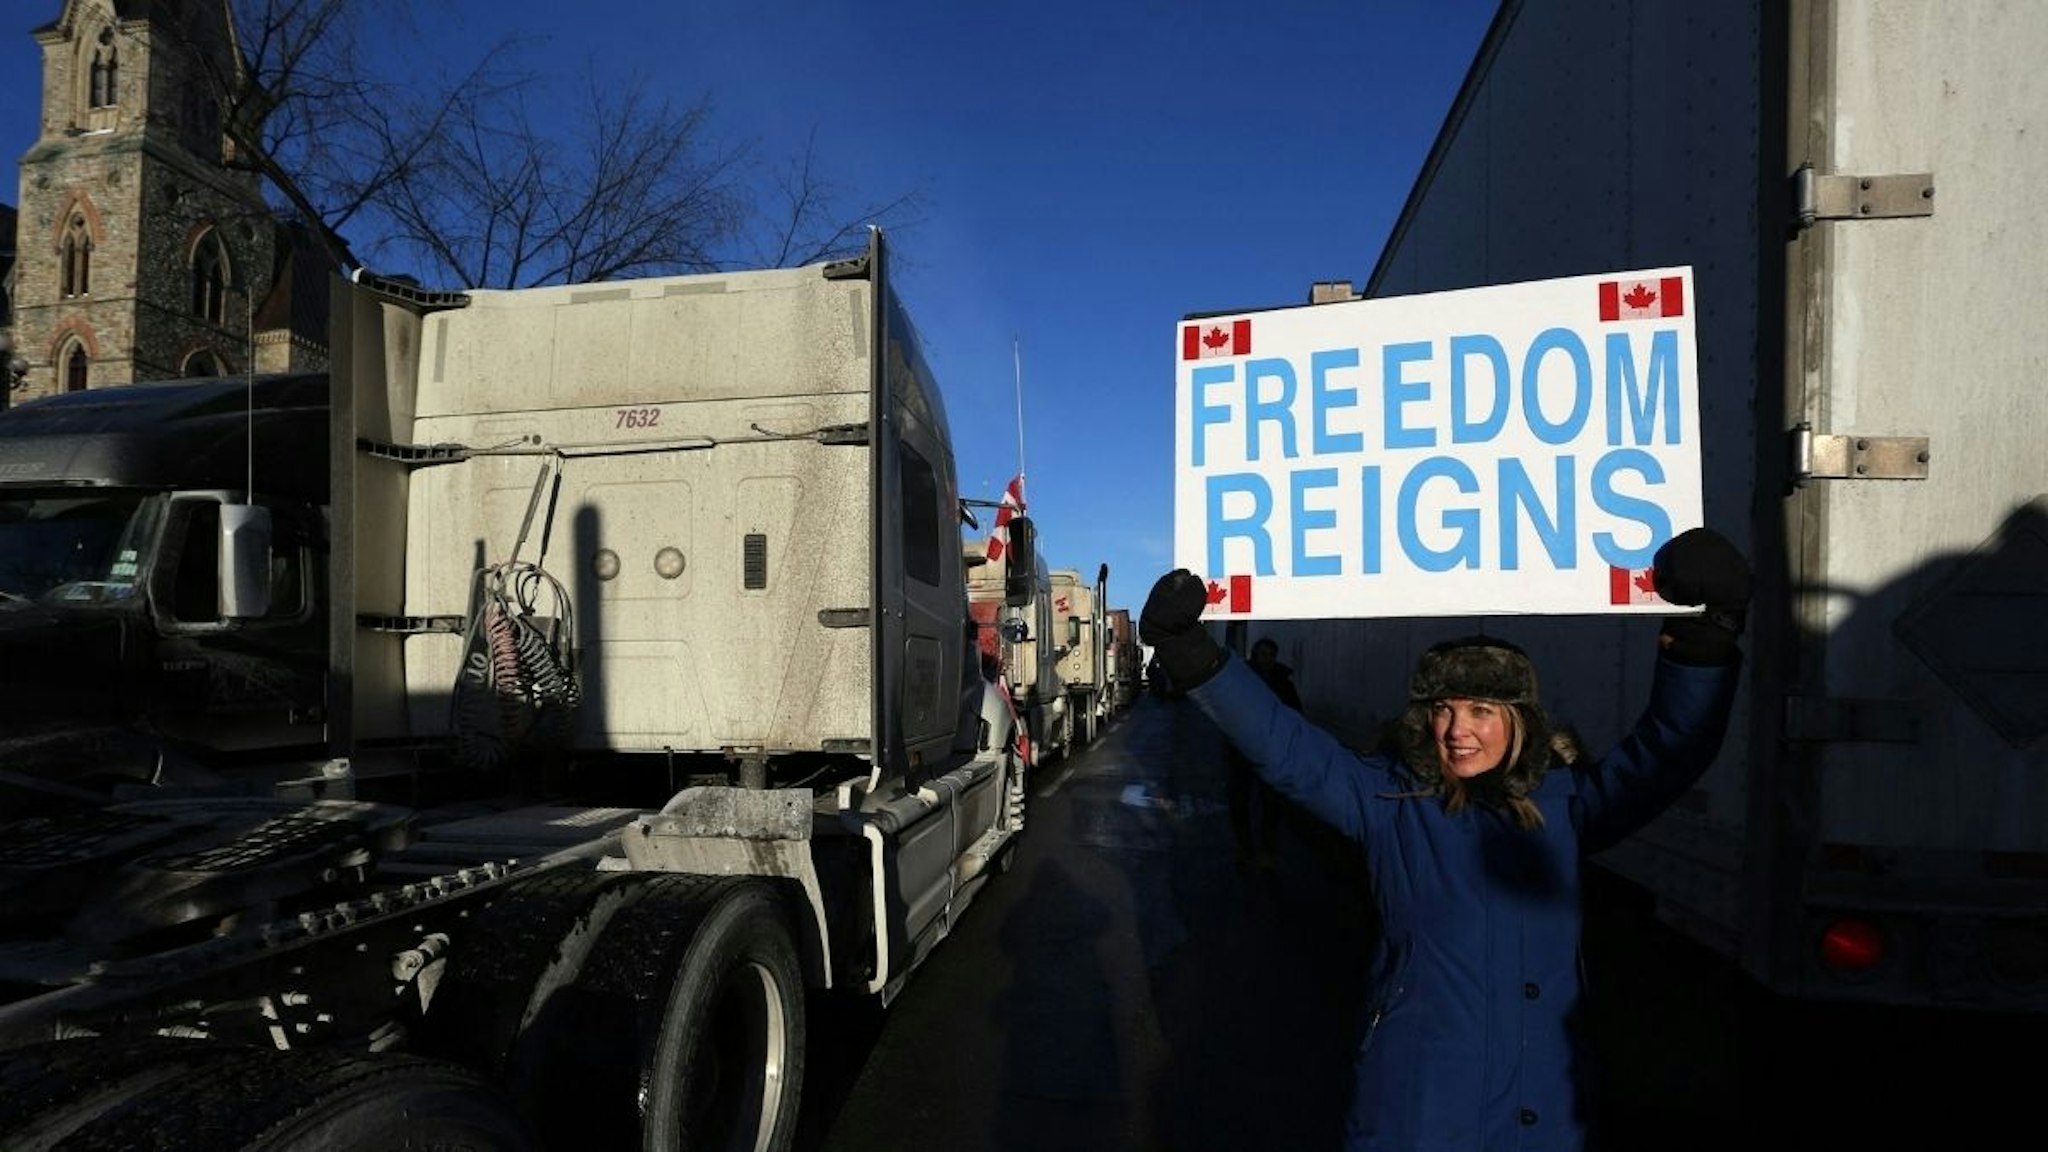 A supporter holds a sign while participating in a "Freedom Convoy" protesting against COVID-19 vaccine mandates and restrictions in front of the Parliament of Canada on January 28, 2022 in Ottawa, Canada.